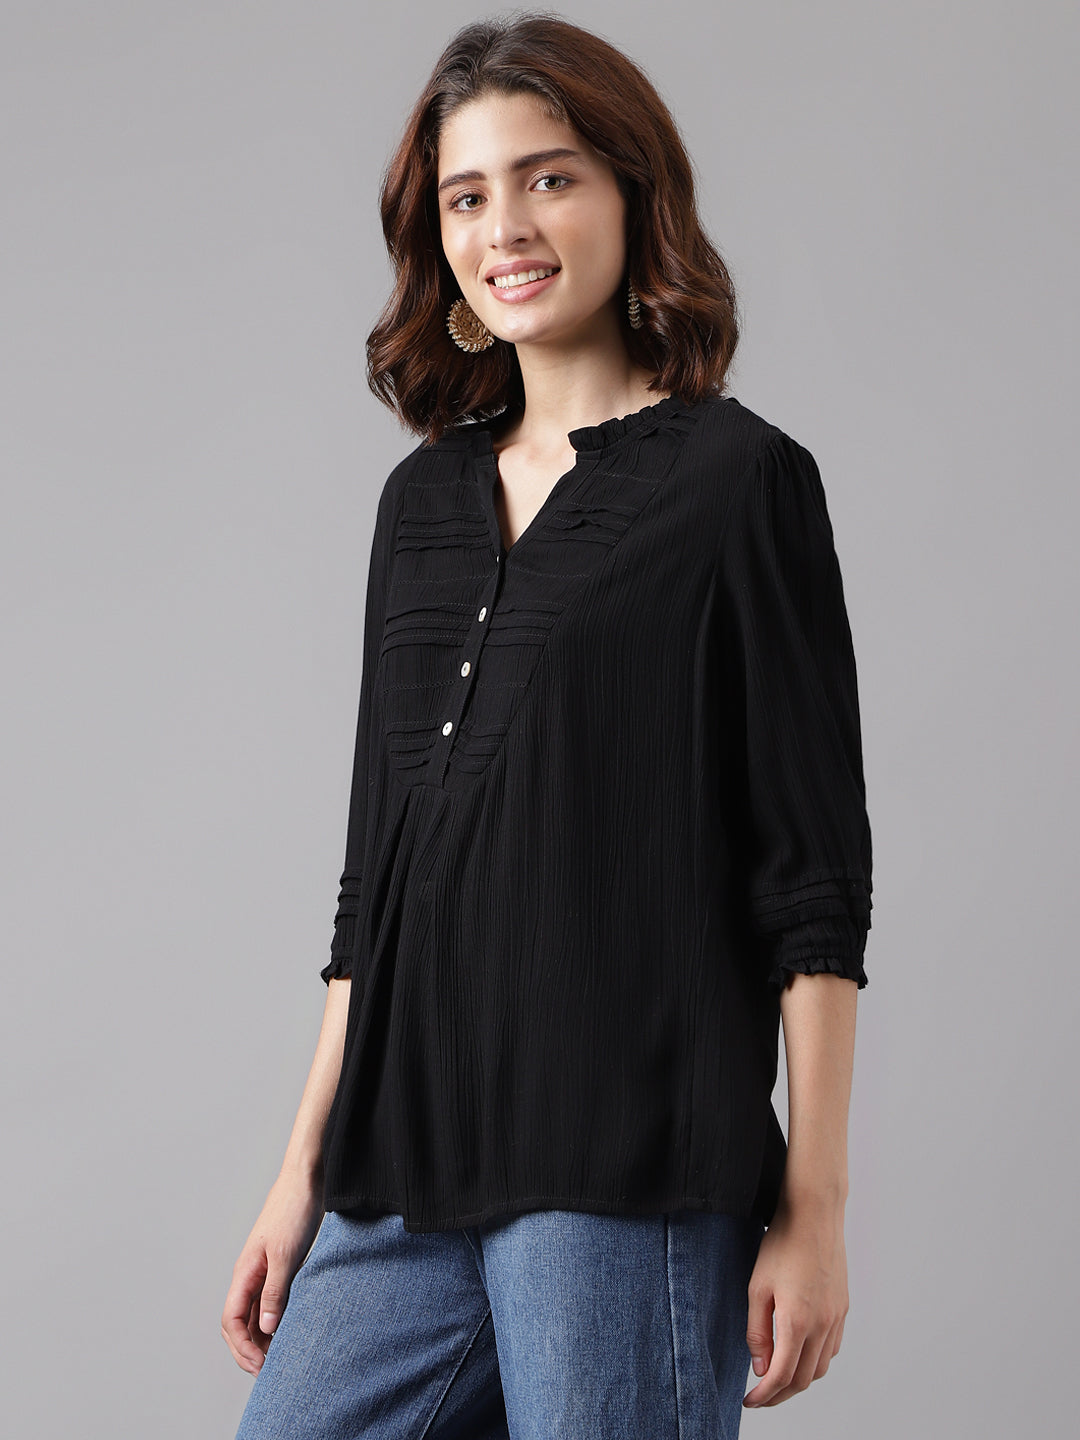 Black 3/4 Sleeve Solid Straight Tunic Tops For Women & Girls